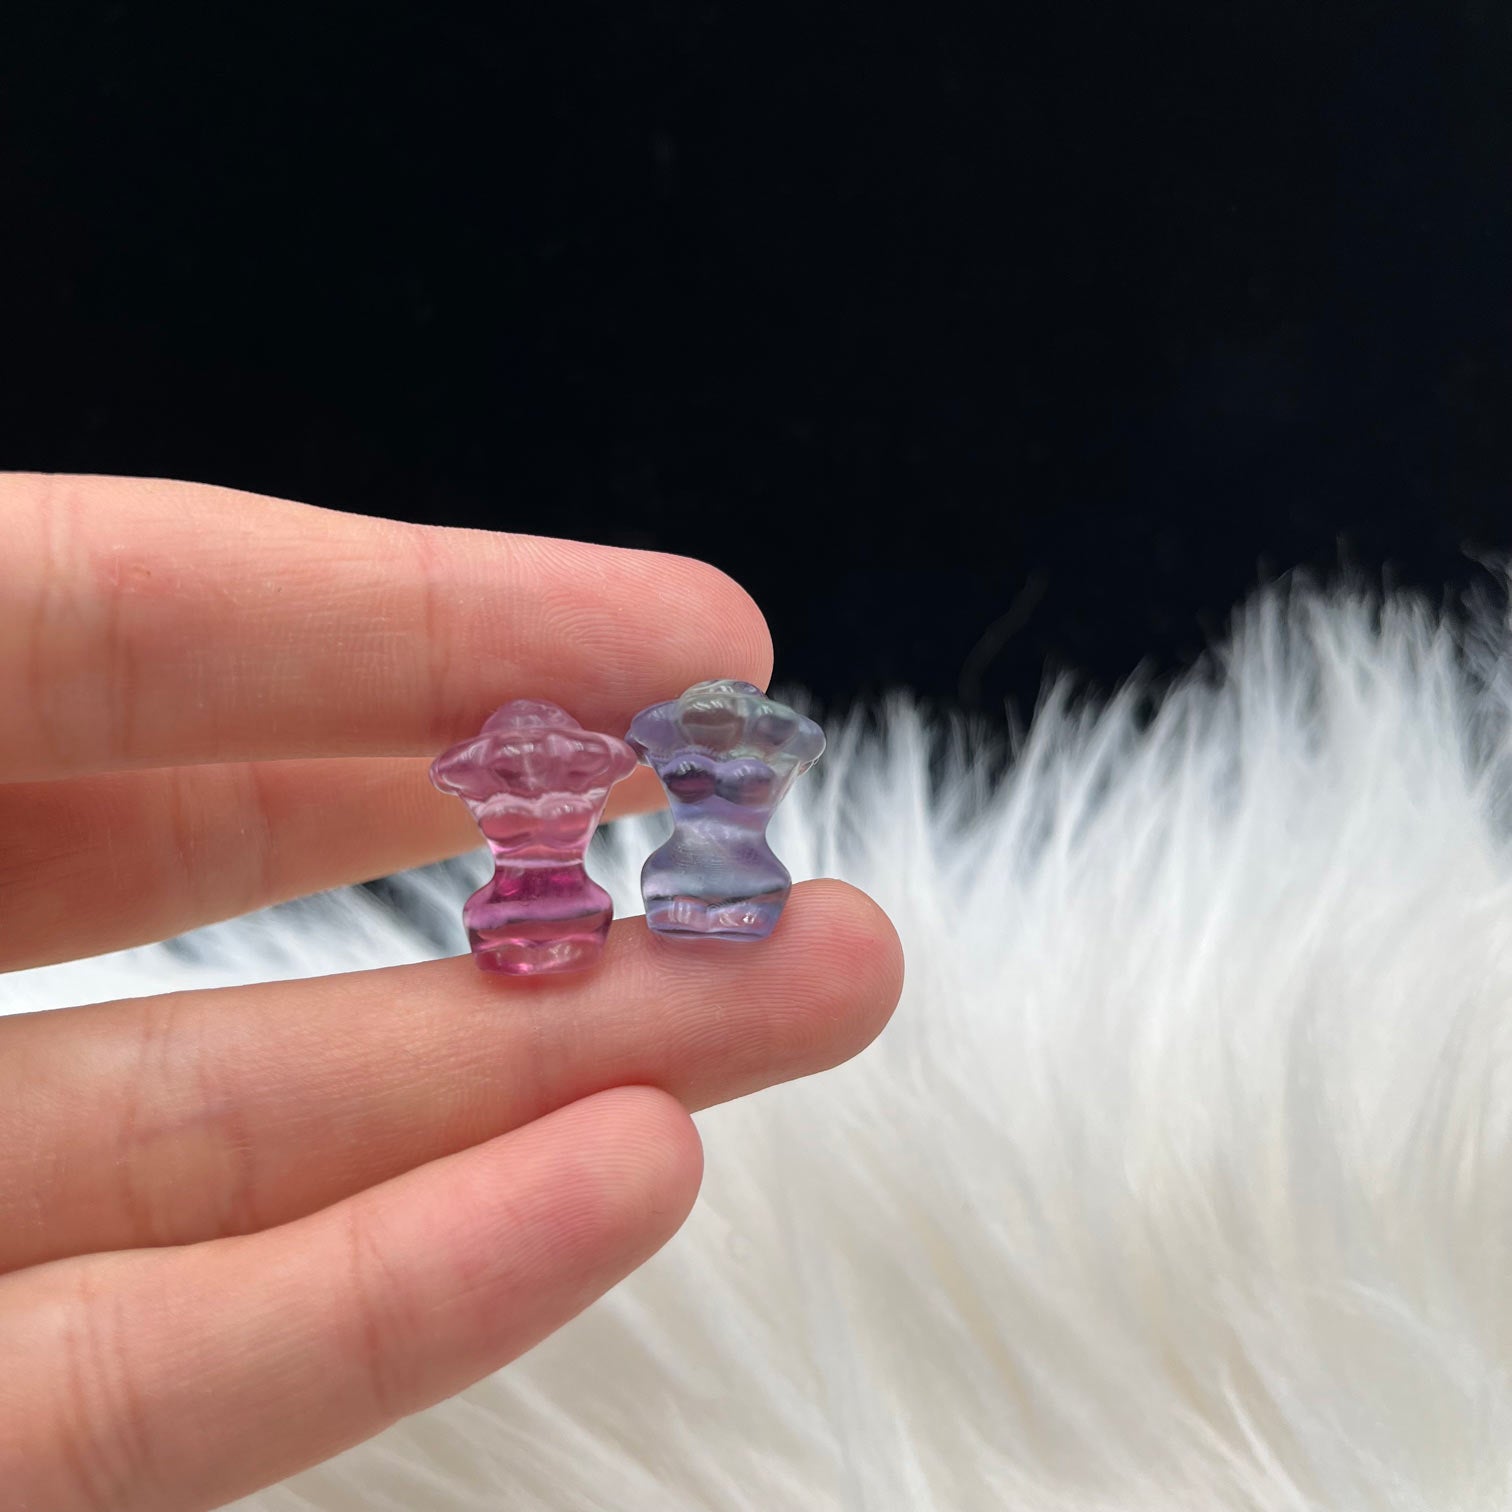 Mini Fluorite Crystal with Body Shark and Squirrel design, size 52